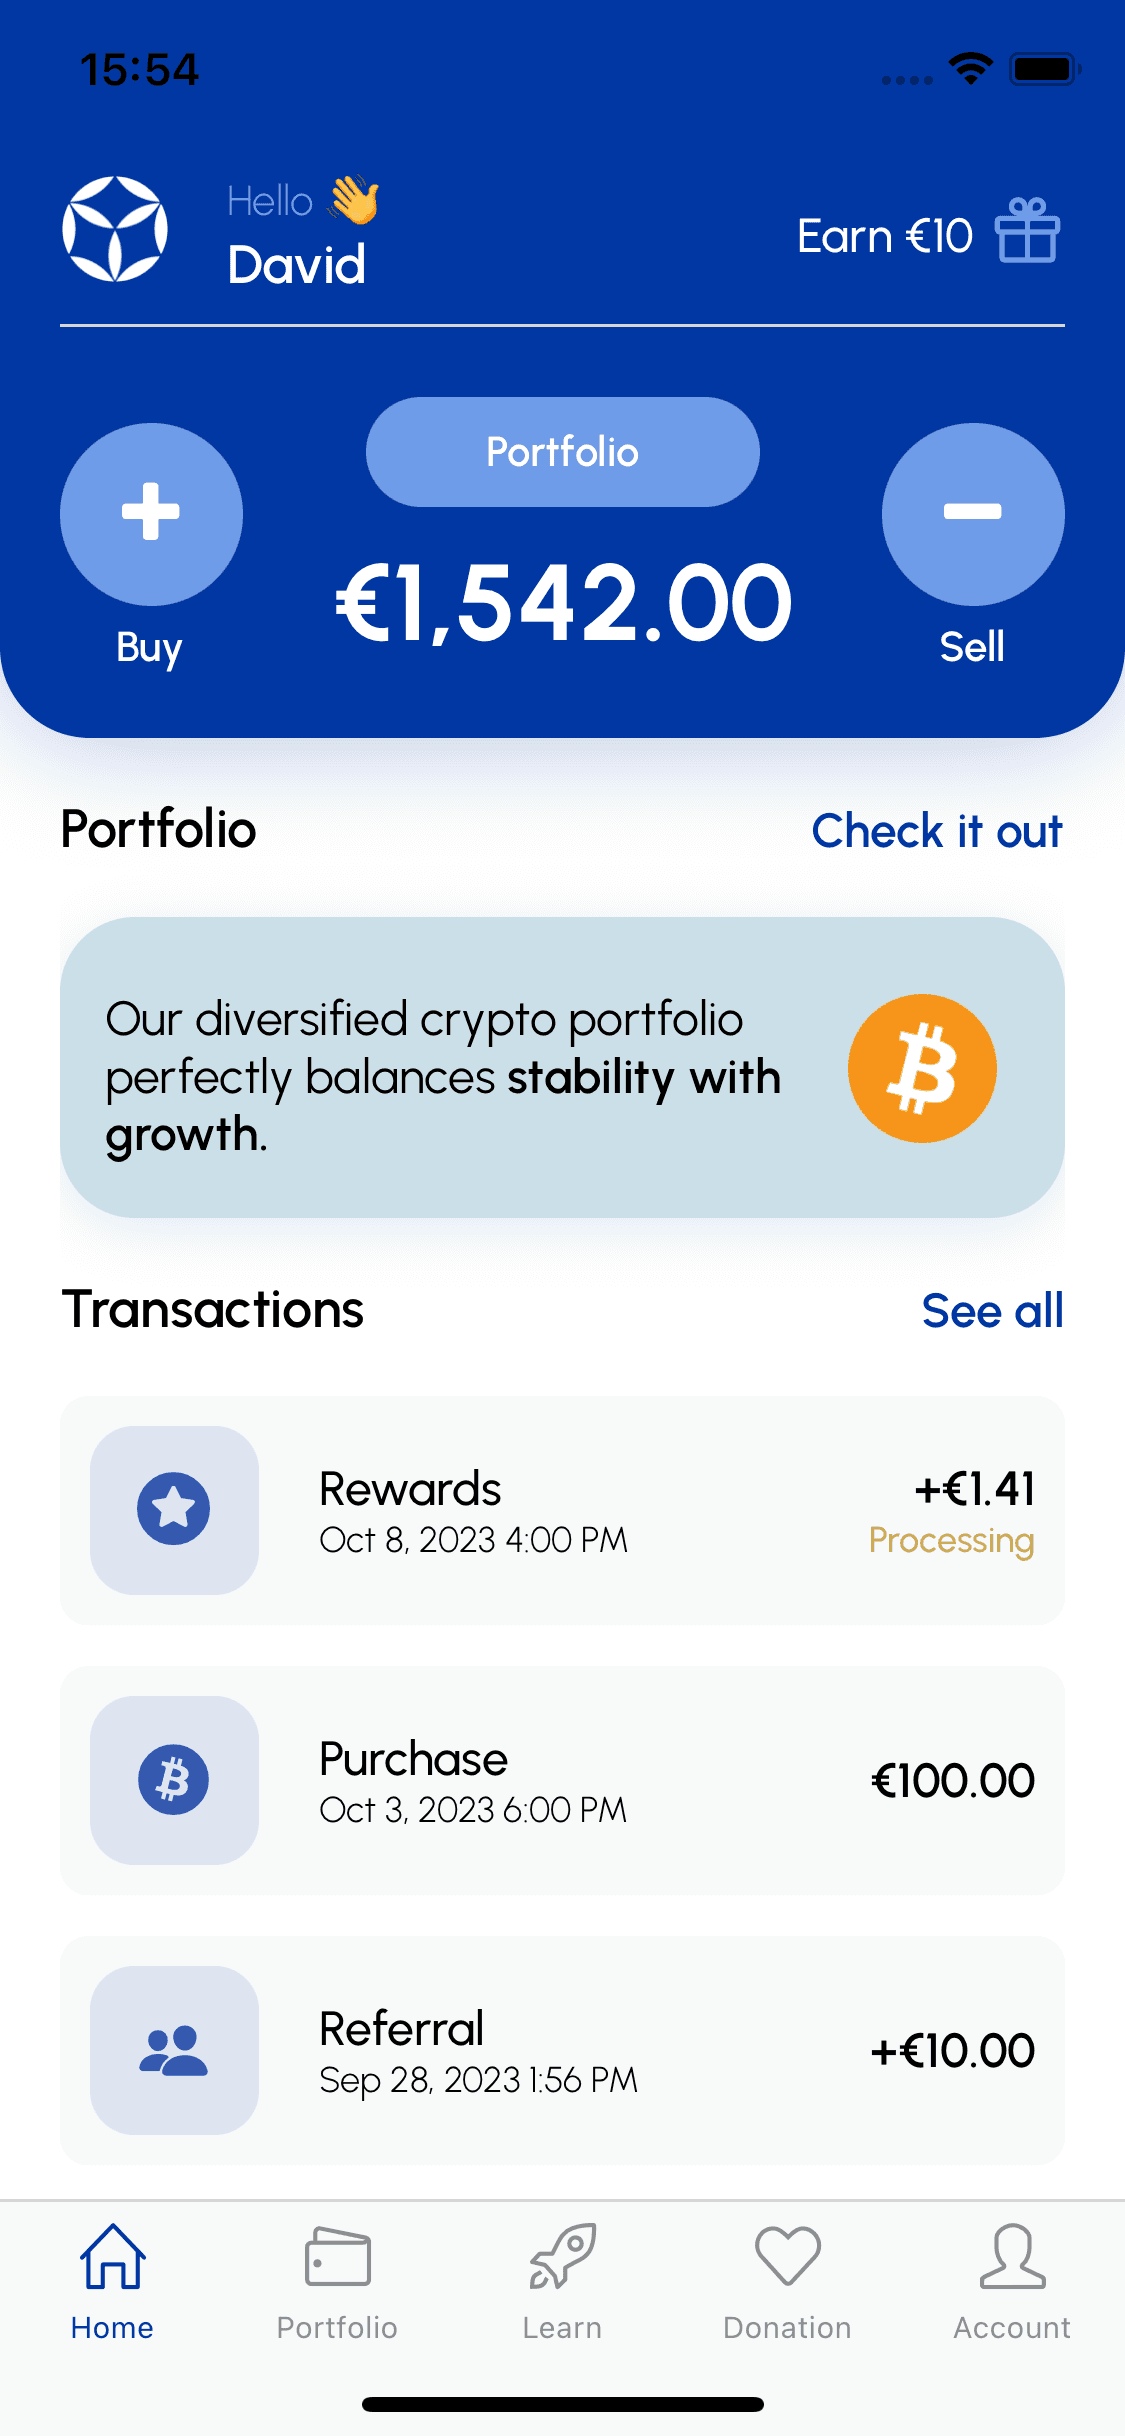 The simple app you need for your first steps into crypto